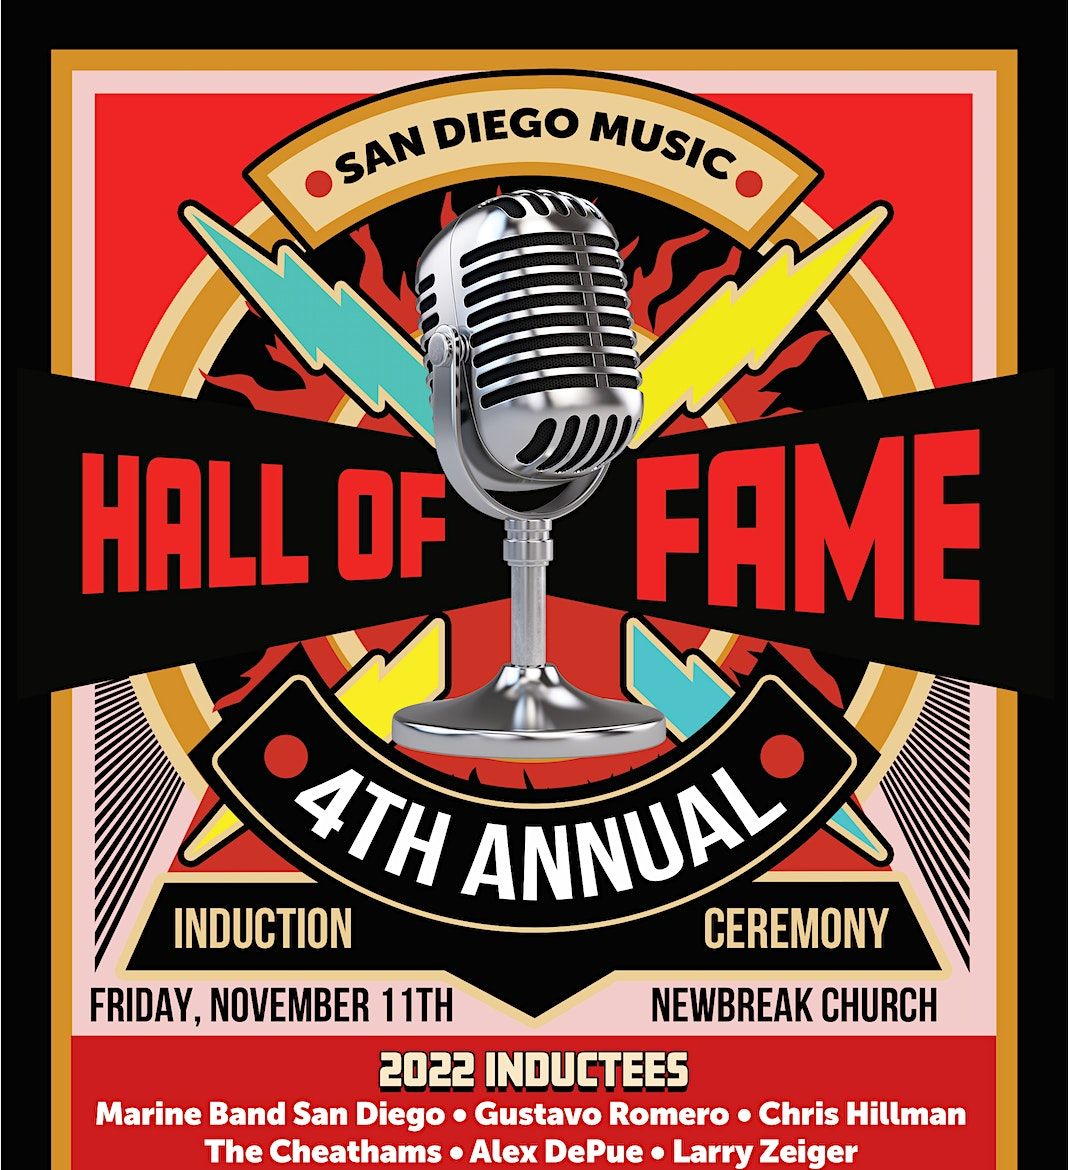 4th Annual San Diego Music Hall of Fame Induction Ceremony